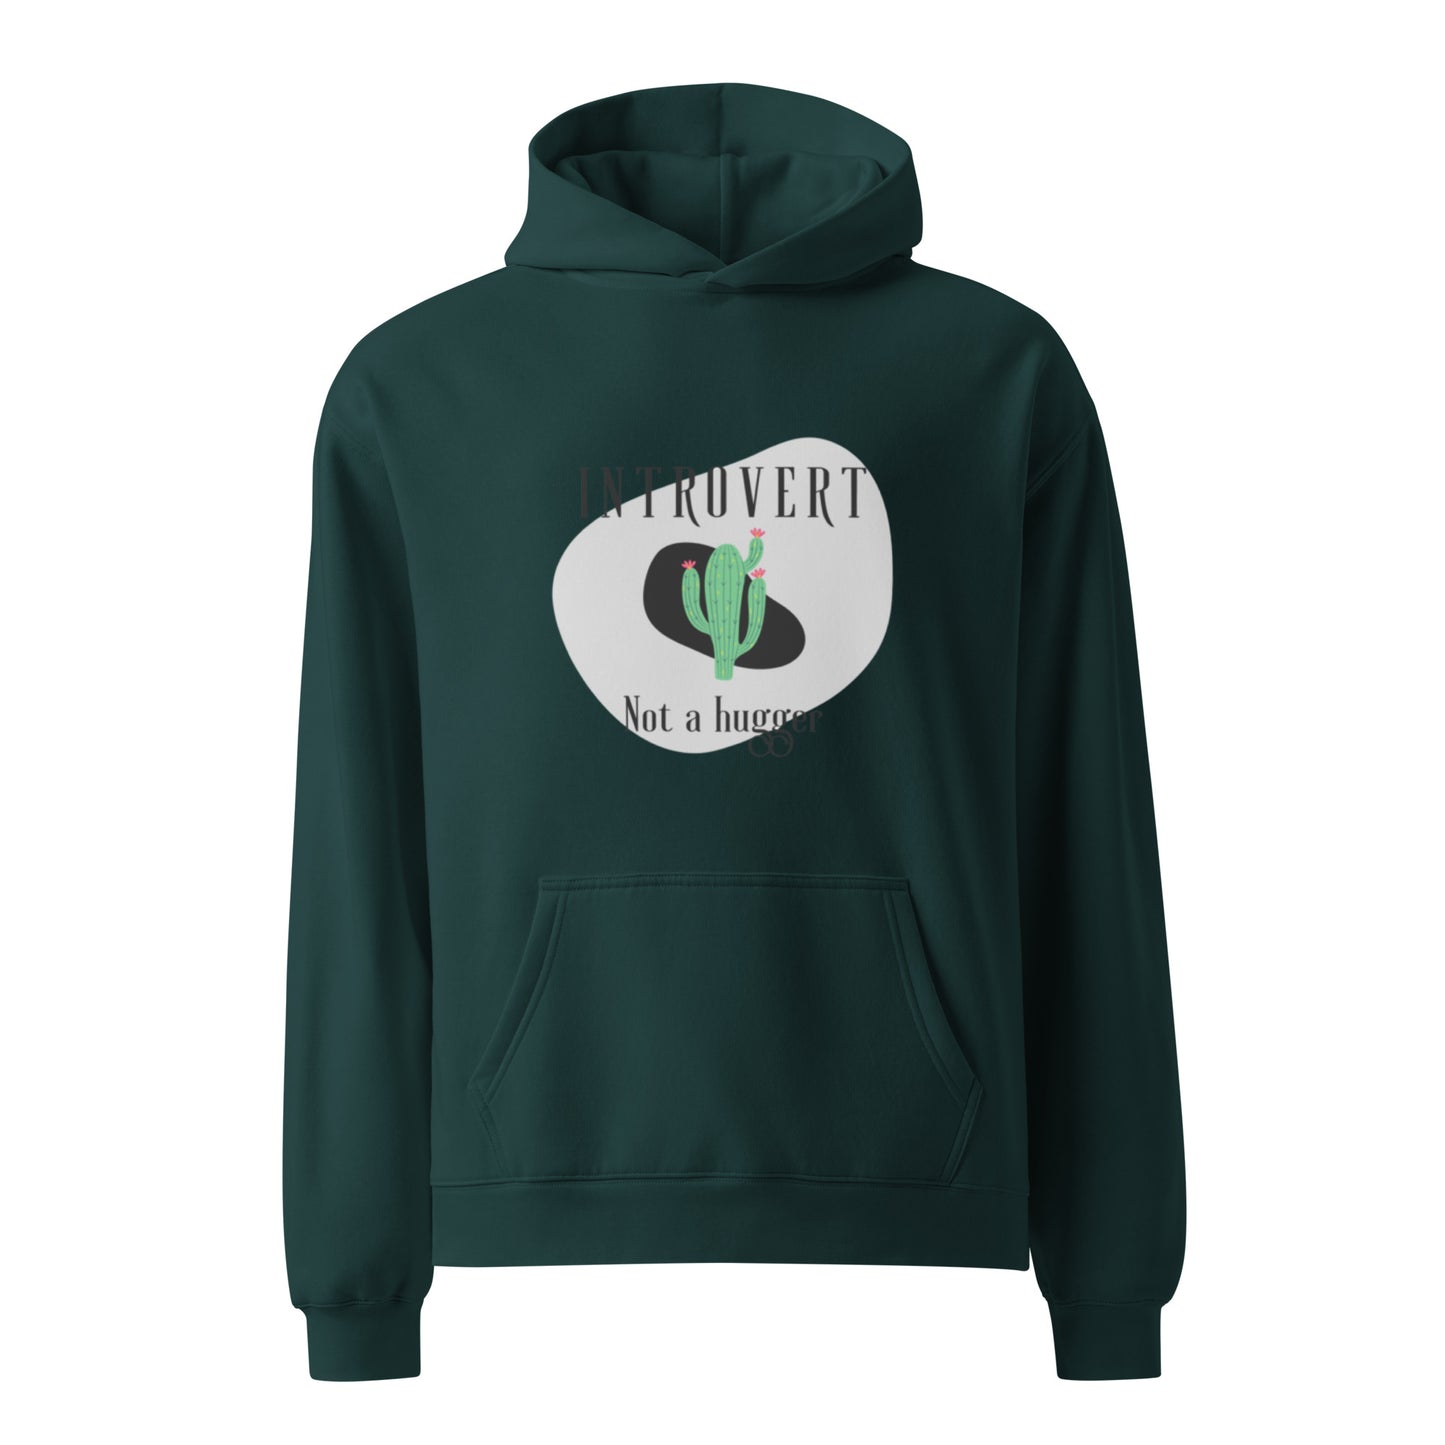 Introvert Not a Hugger Oversized Hoodie - Eco-Friendly Unisex Fit